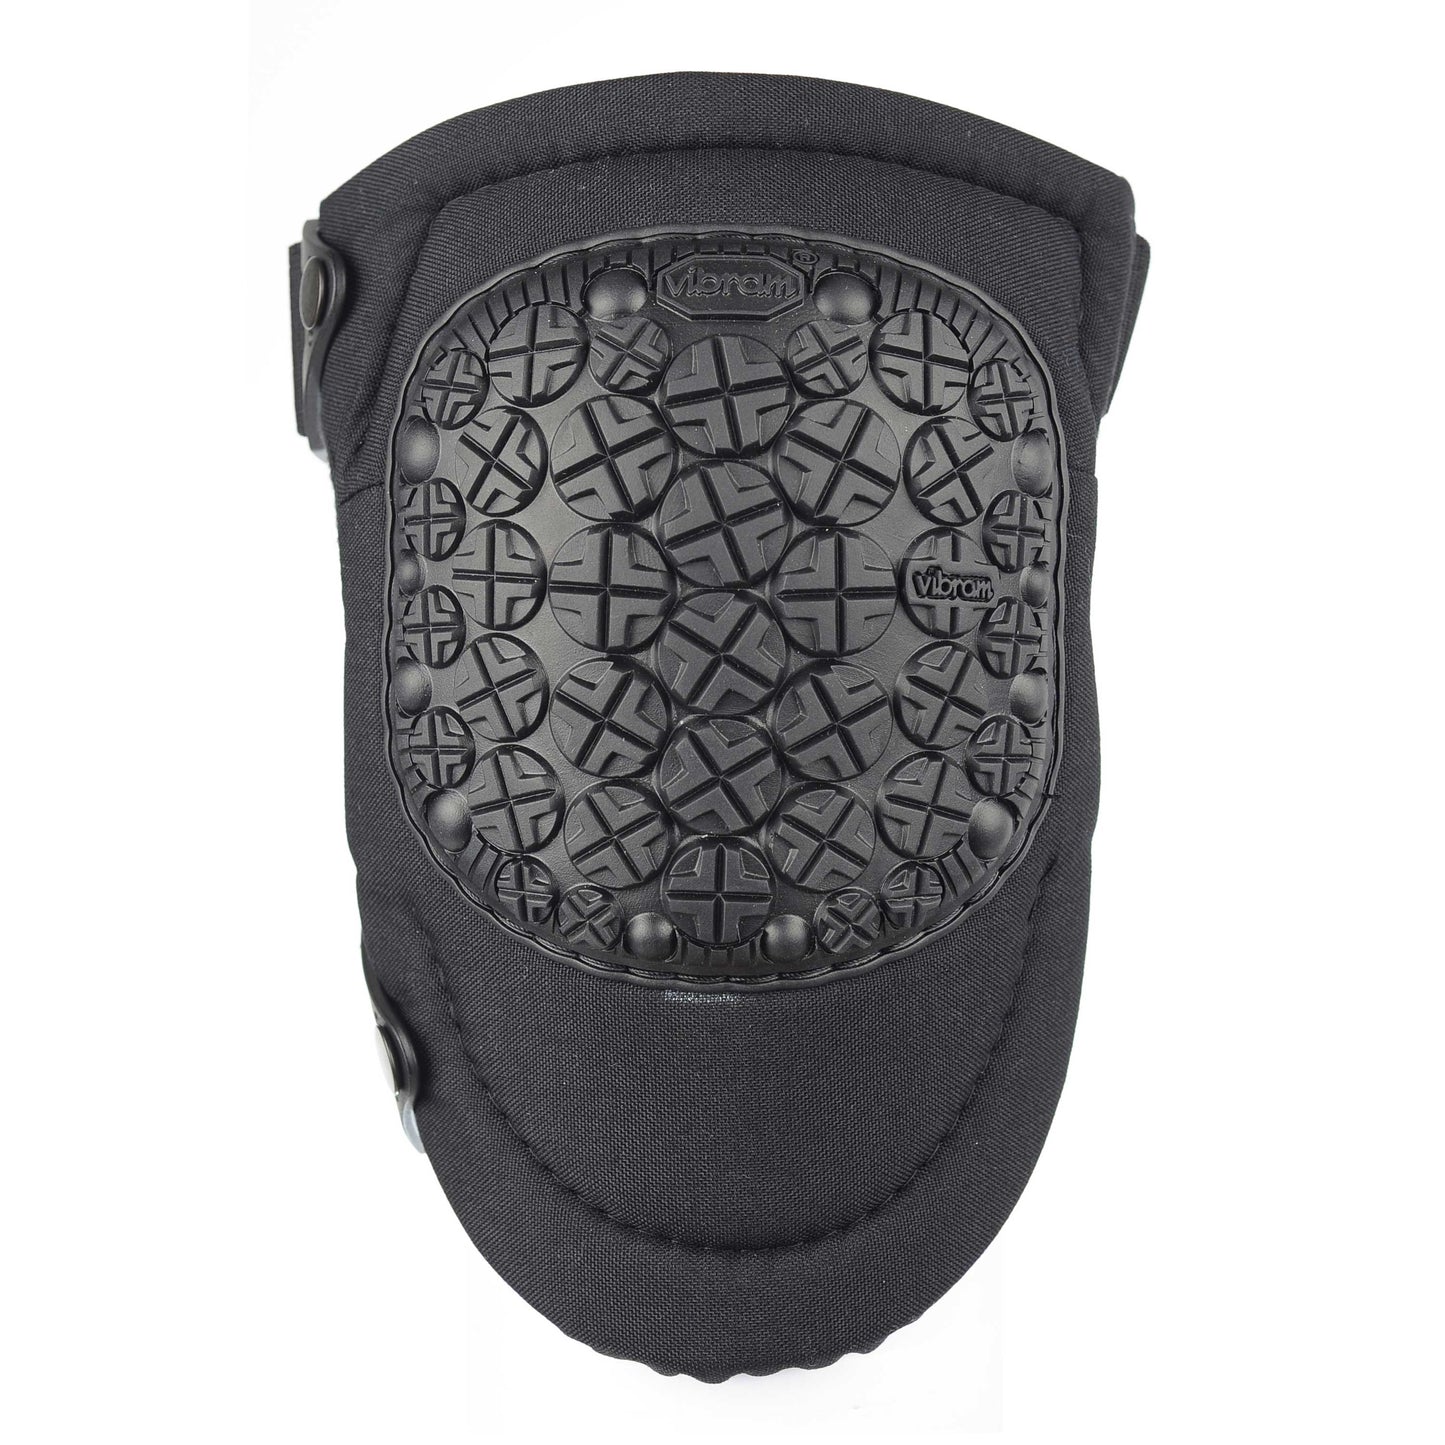 AltaFLEX-360™ Tactical Knee Pads - Strong Grip, Durable Protection